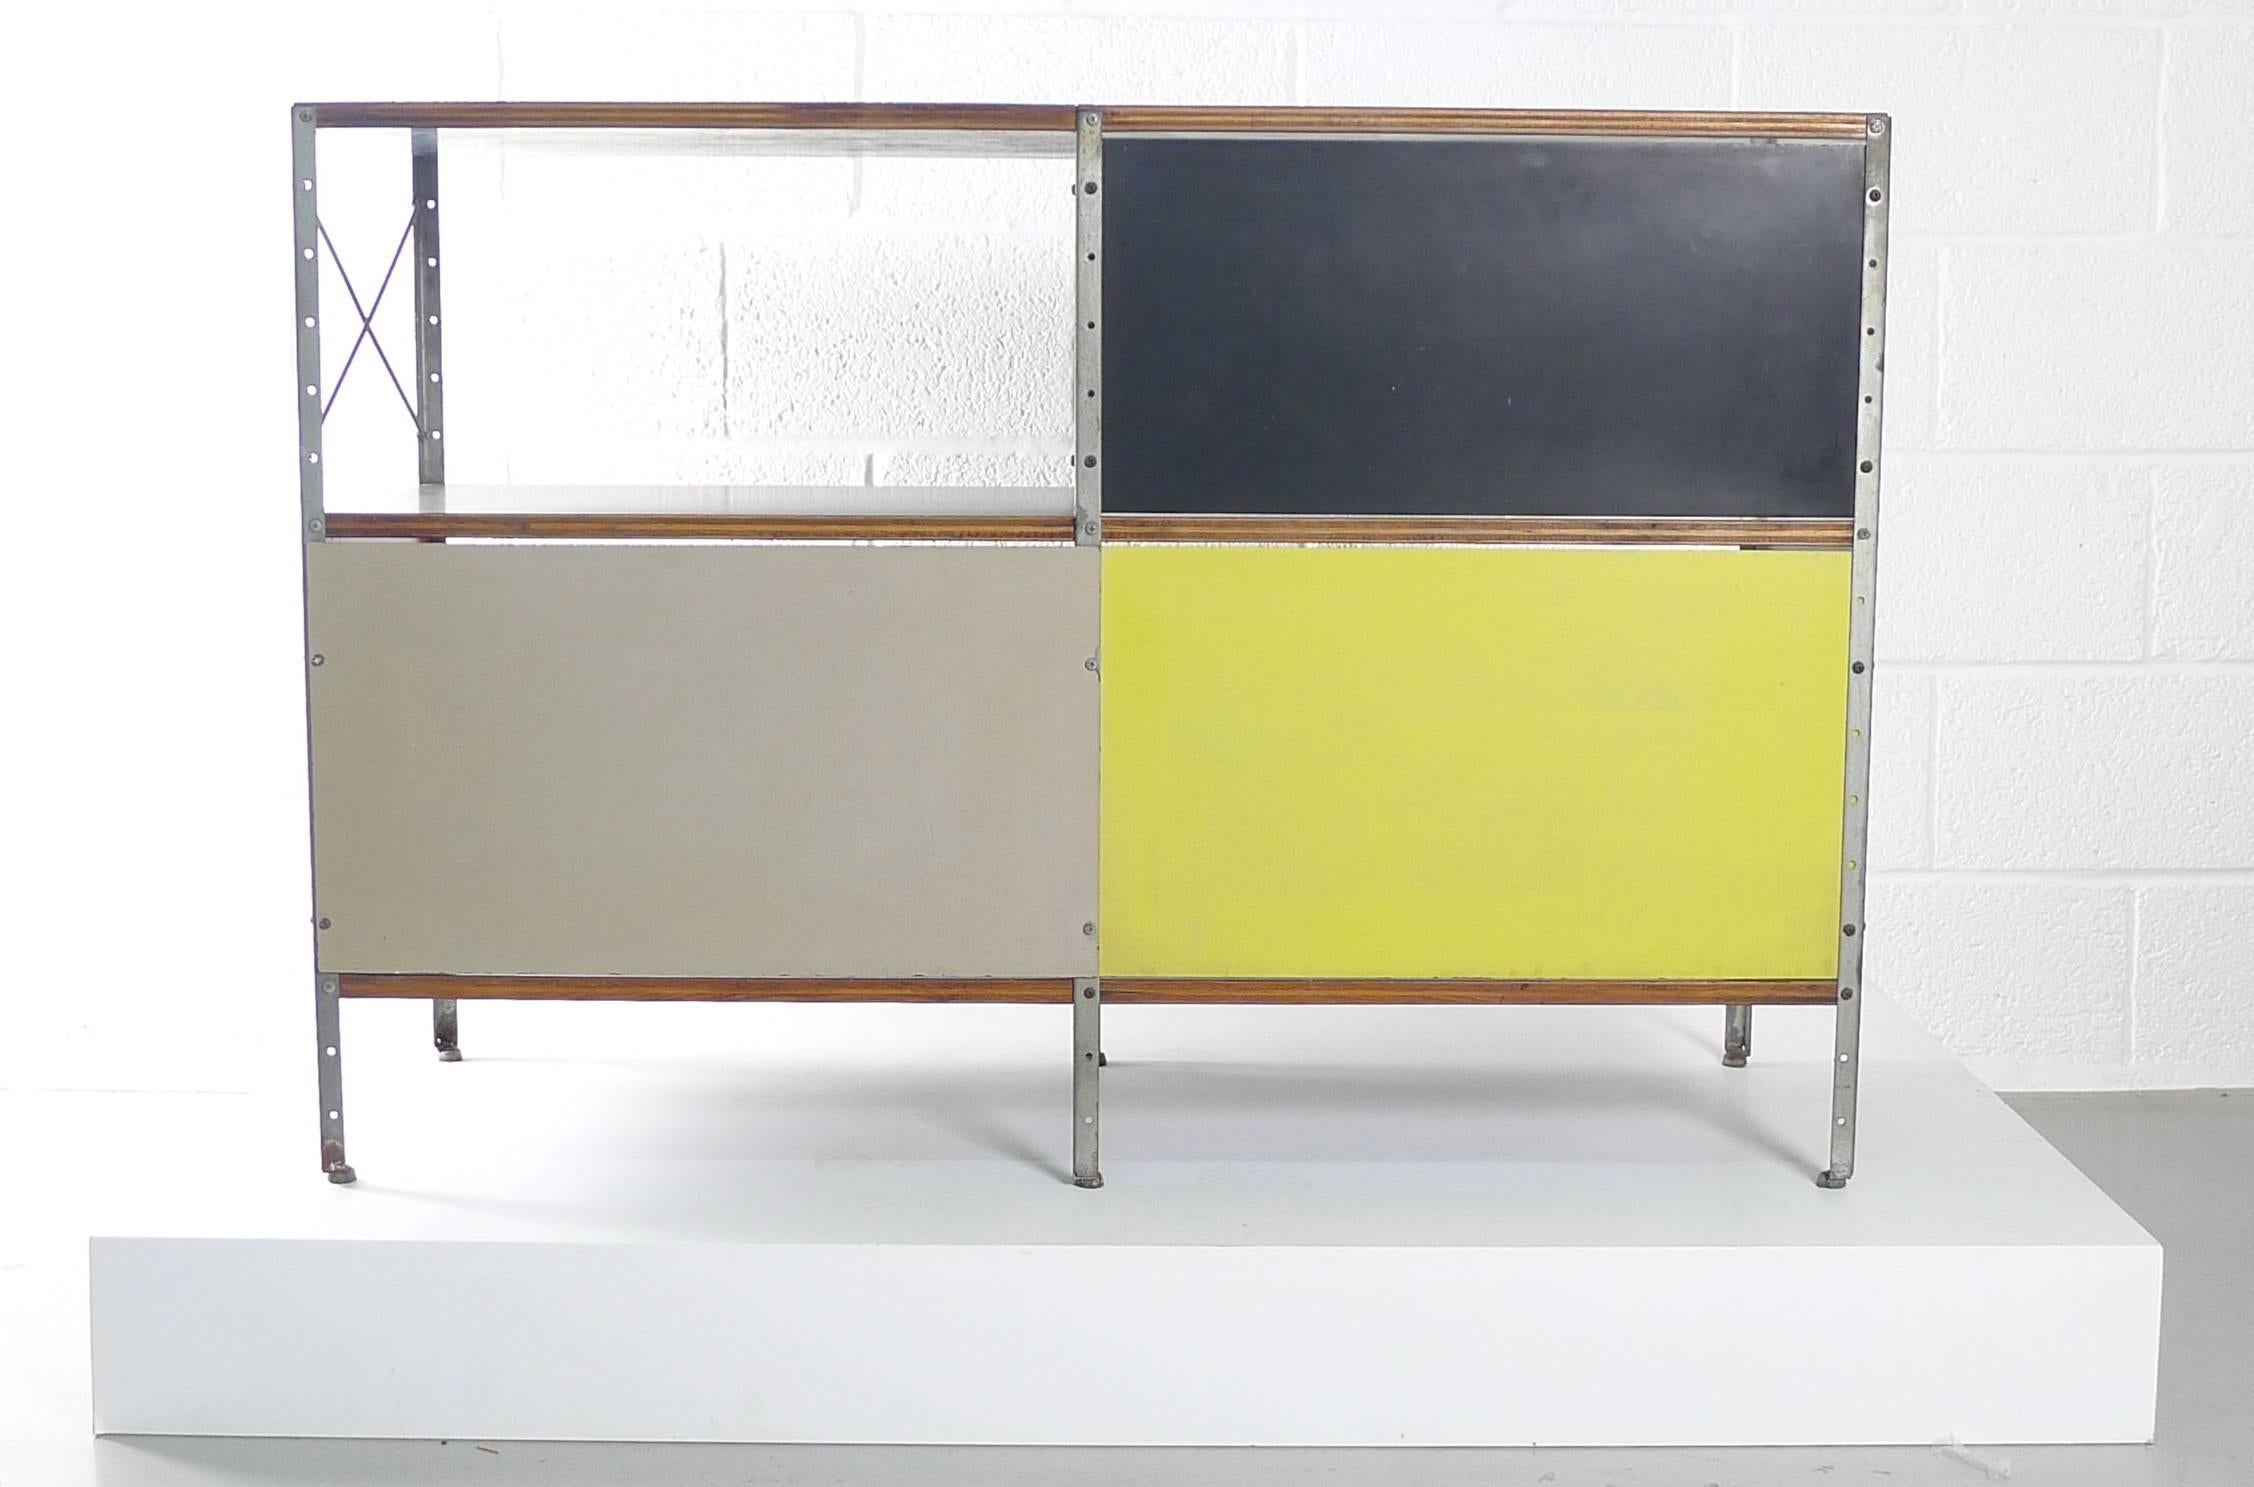 Charles & Ray Eames for Herman Miller USA, ESU 200 - C, first series circa 1950 with black laminate shelves and top, Masonite back panels in a stunning combination of black, grey and yellow. 

This unit is a nice original early example in original